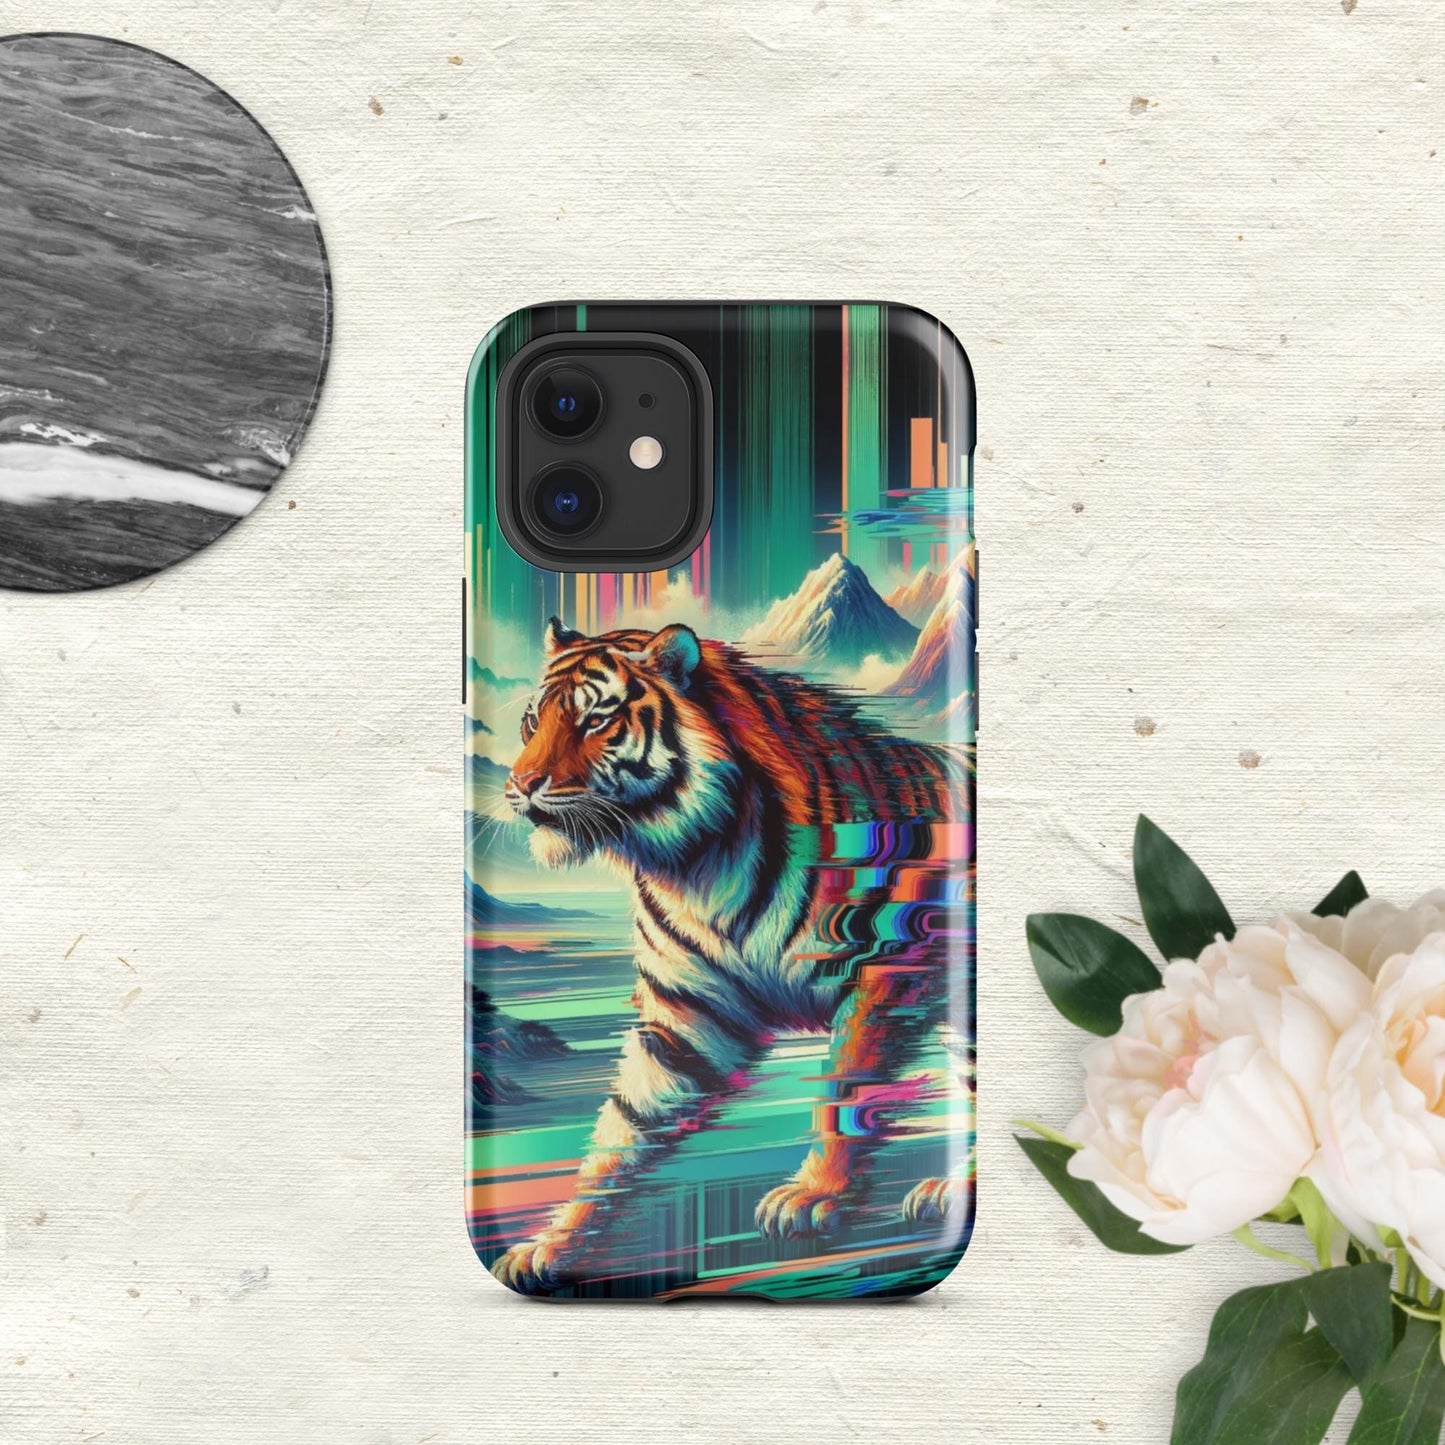 The Hologram Hook Up Glossy / iPhone 12 mini Tiger Glitch Tough Case for iPhone®